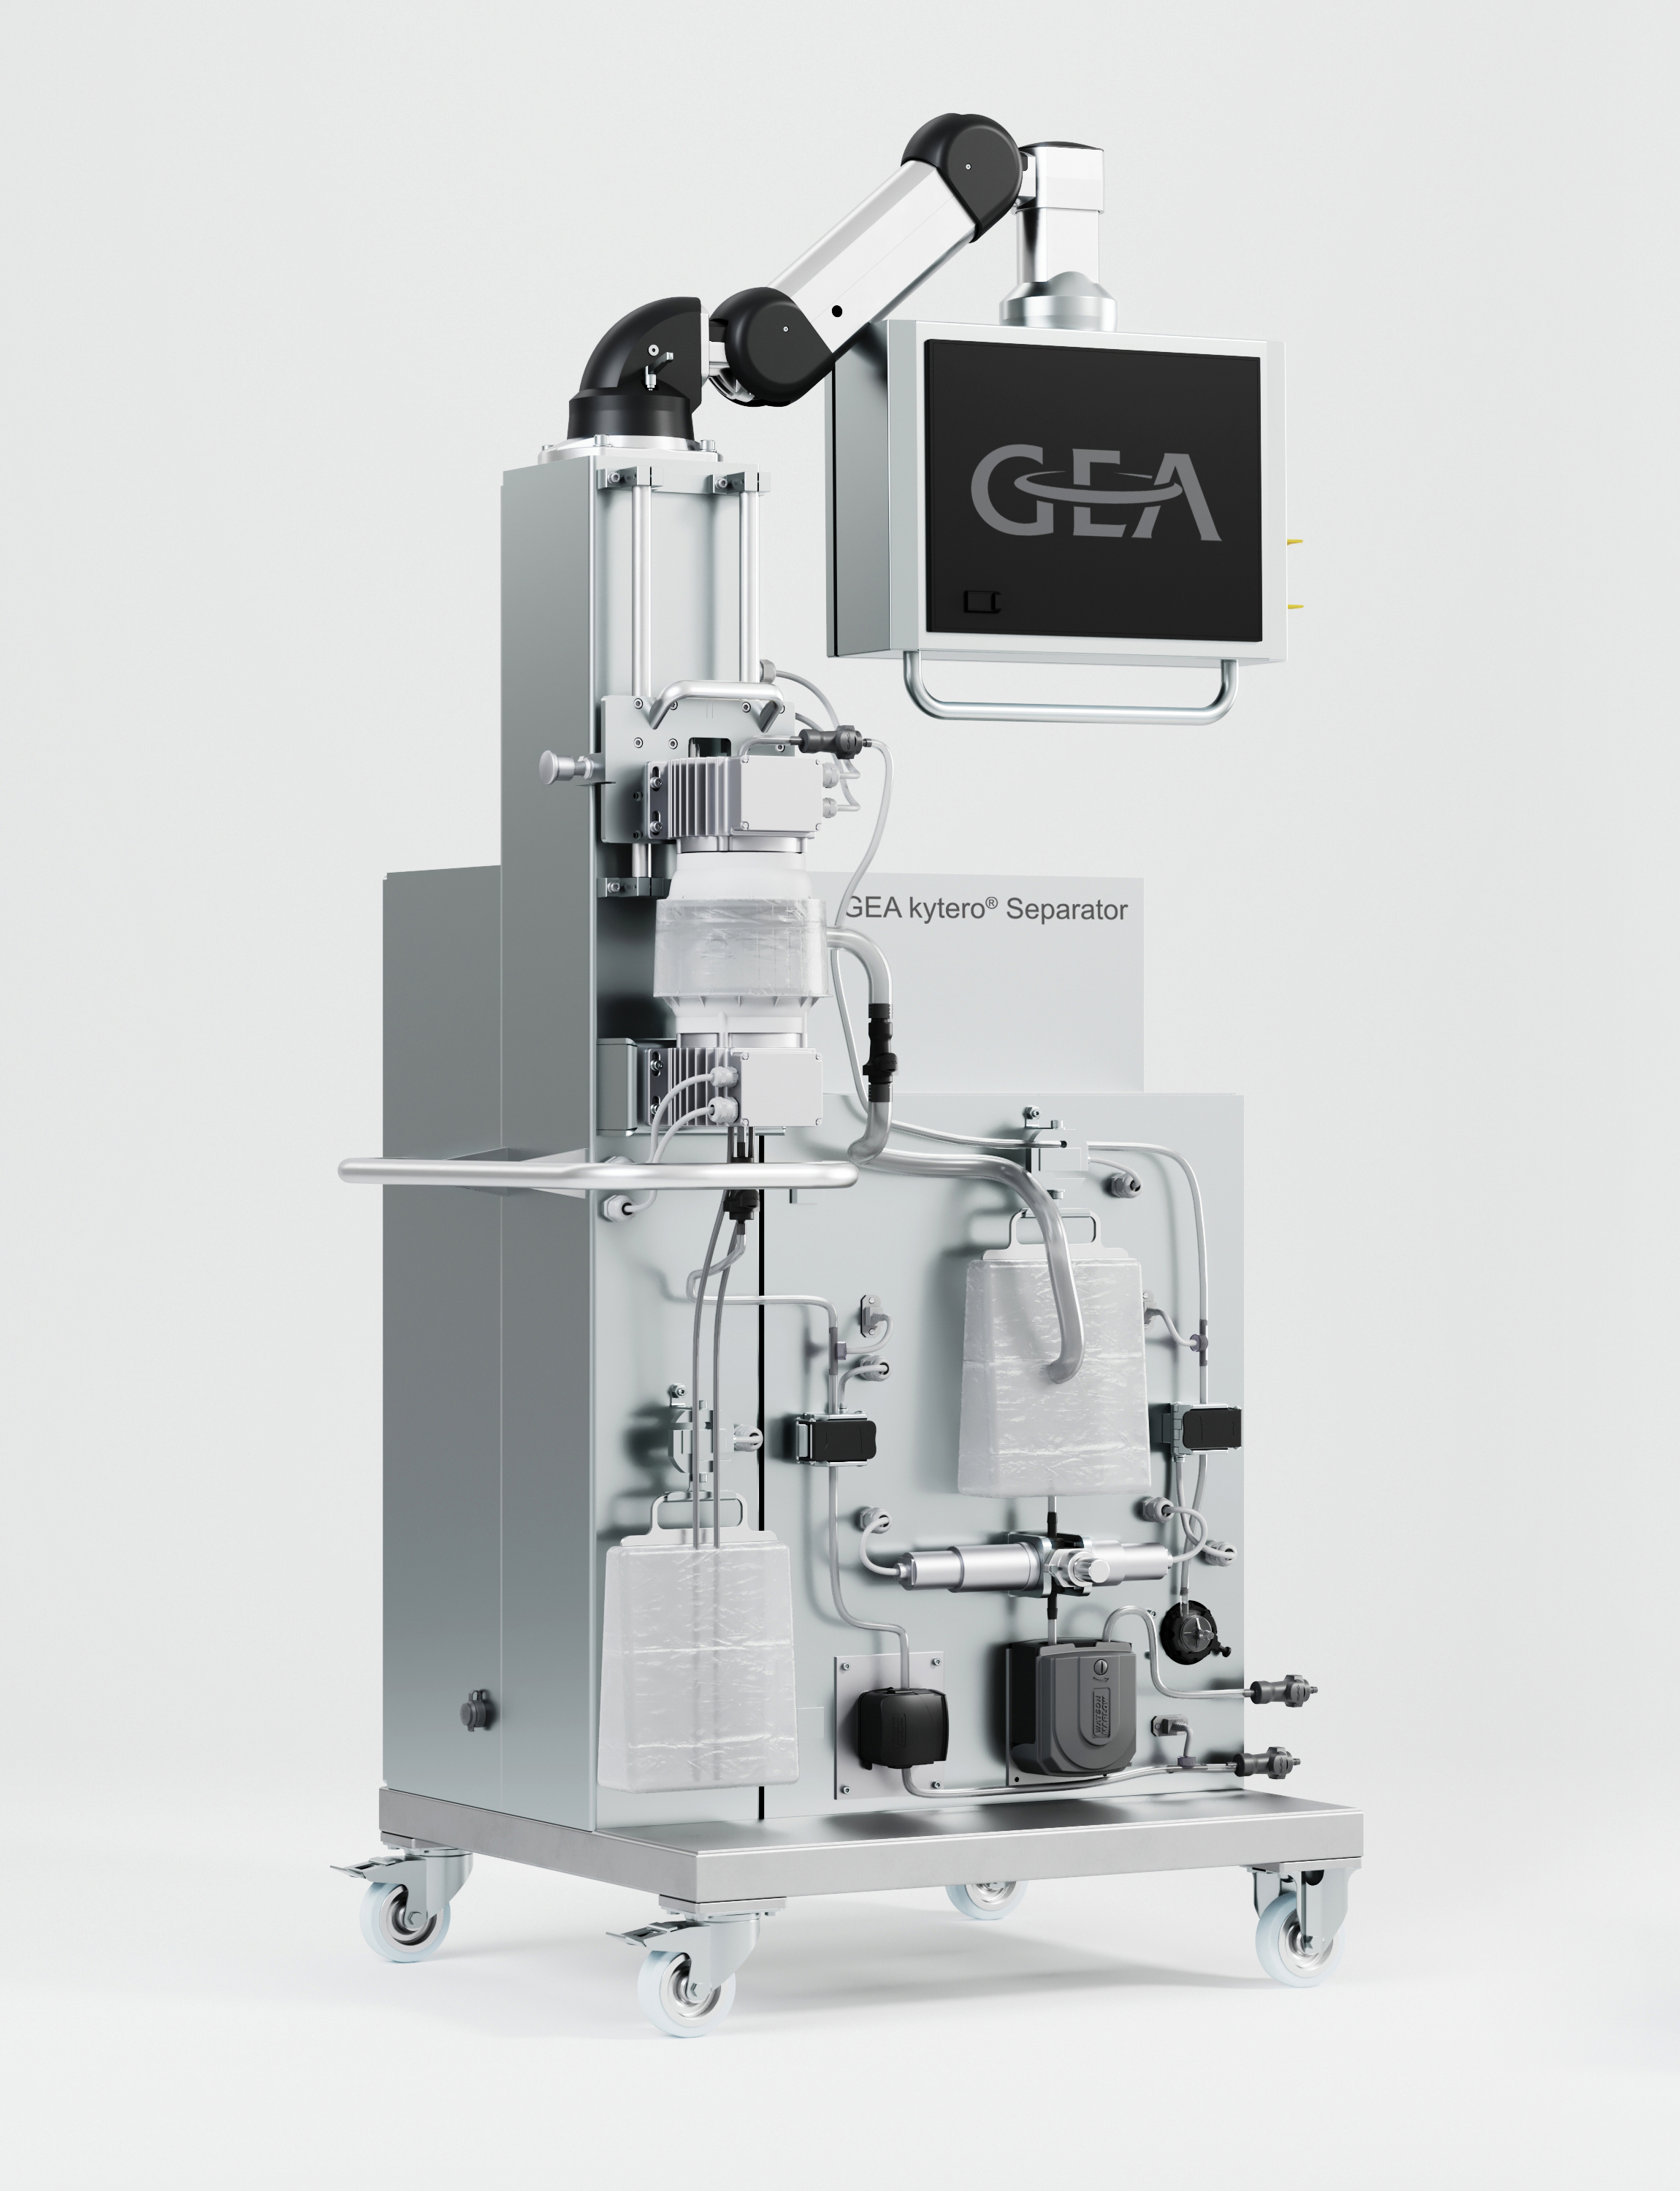 GEA delivers kytero separators to Europe, Asia and US 